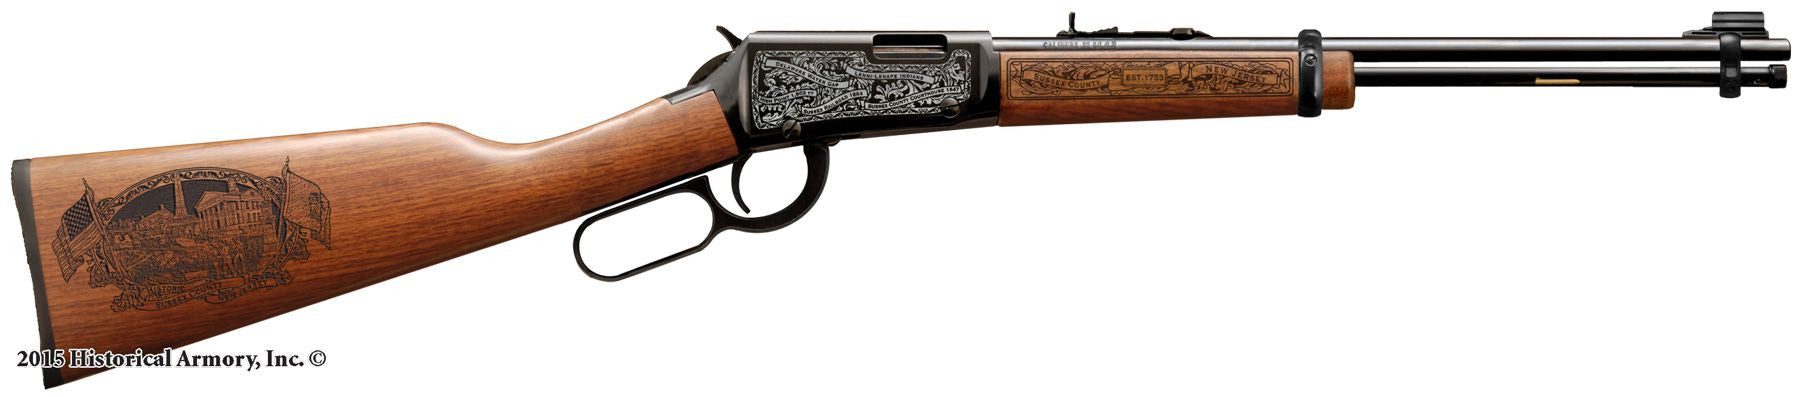 sussex county new jersey engraved rifle h001